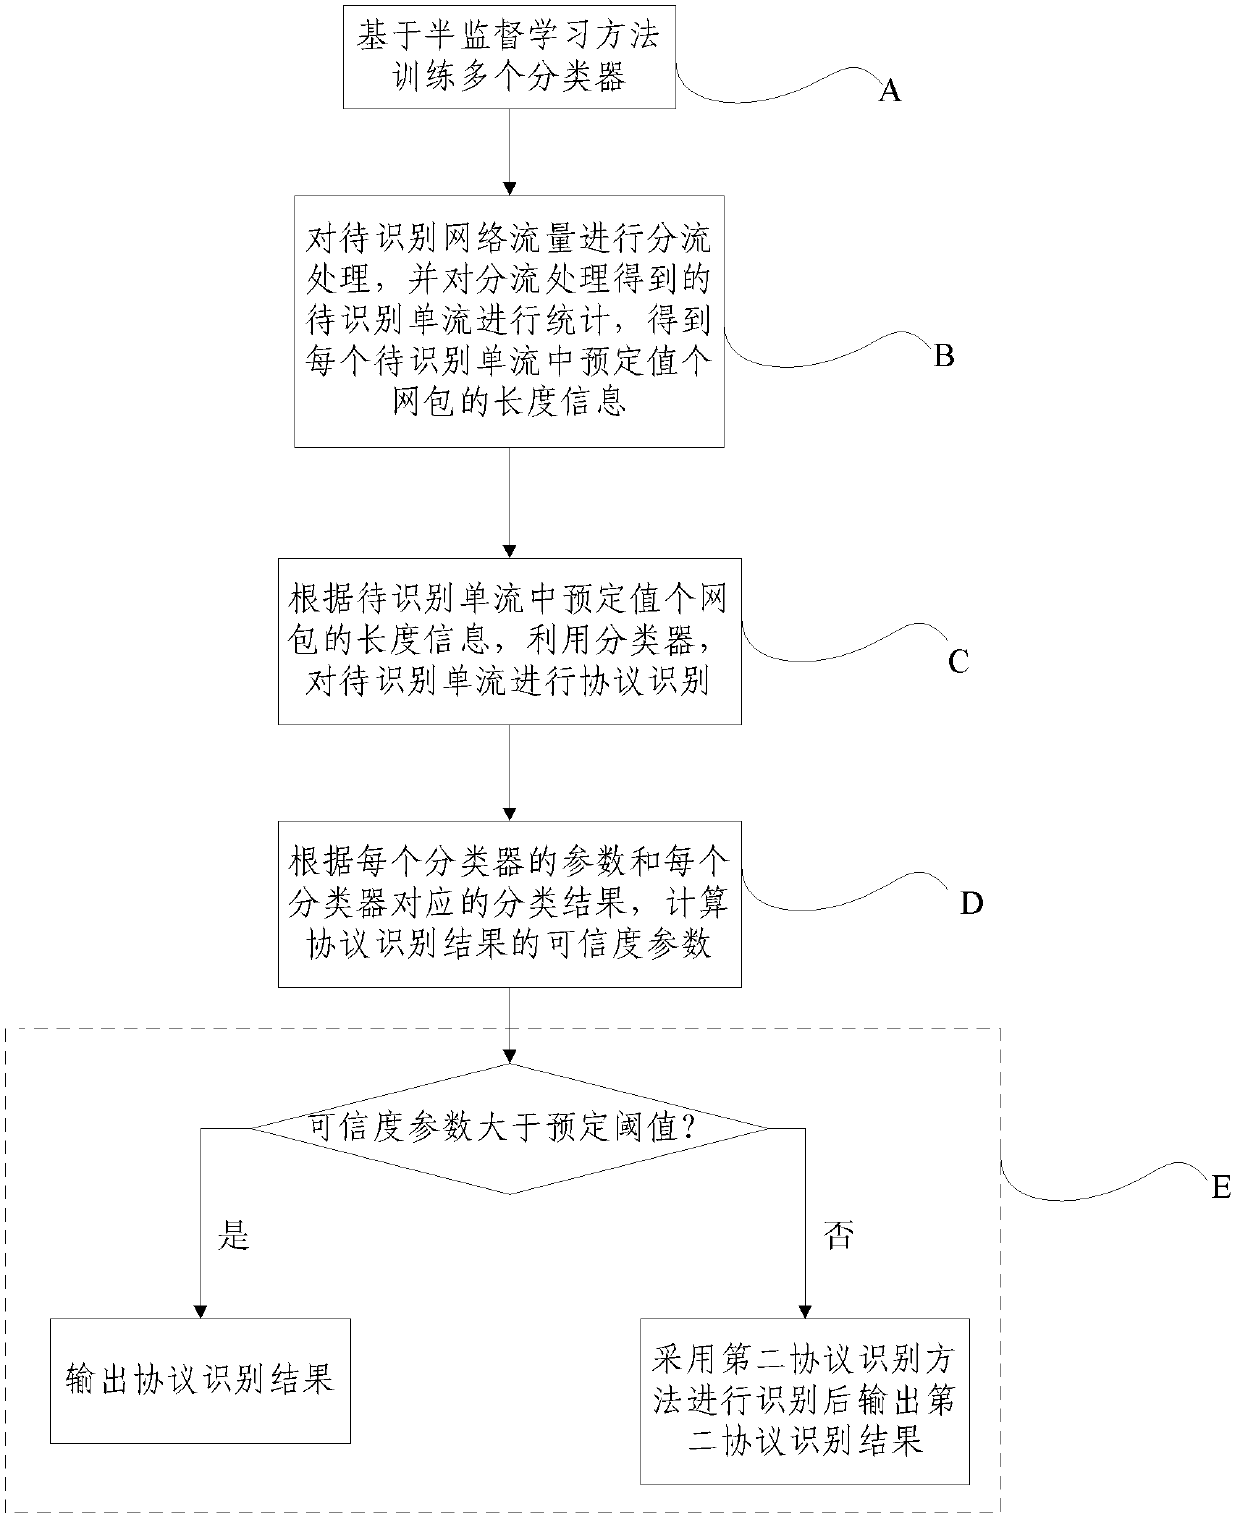 Network protocol identification method and system based on semi-supervised learning